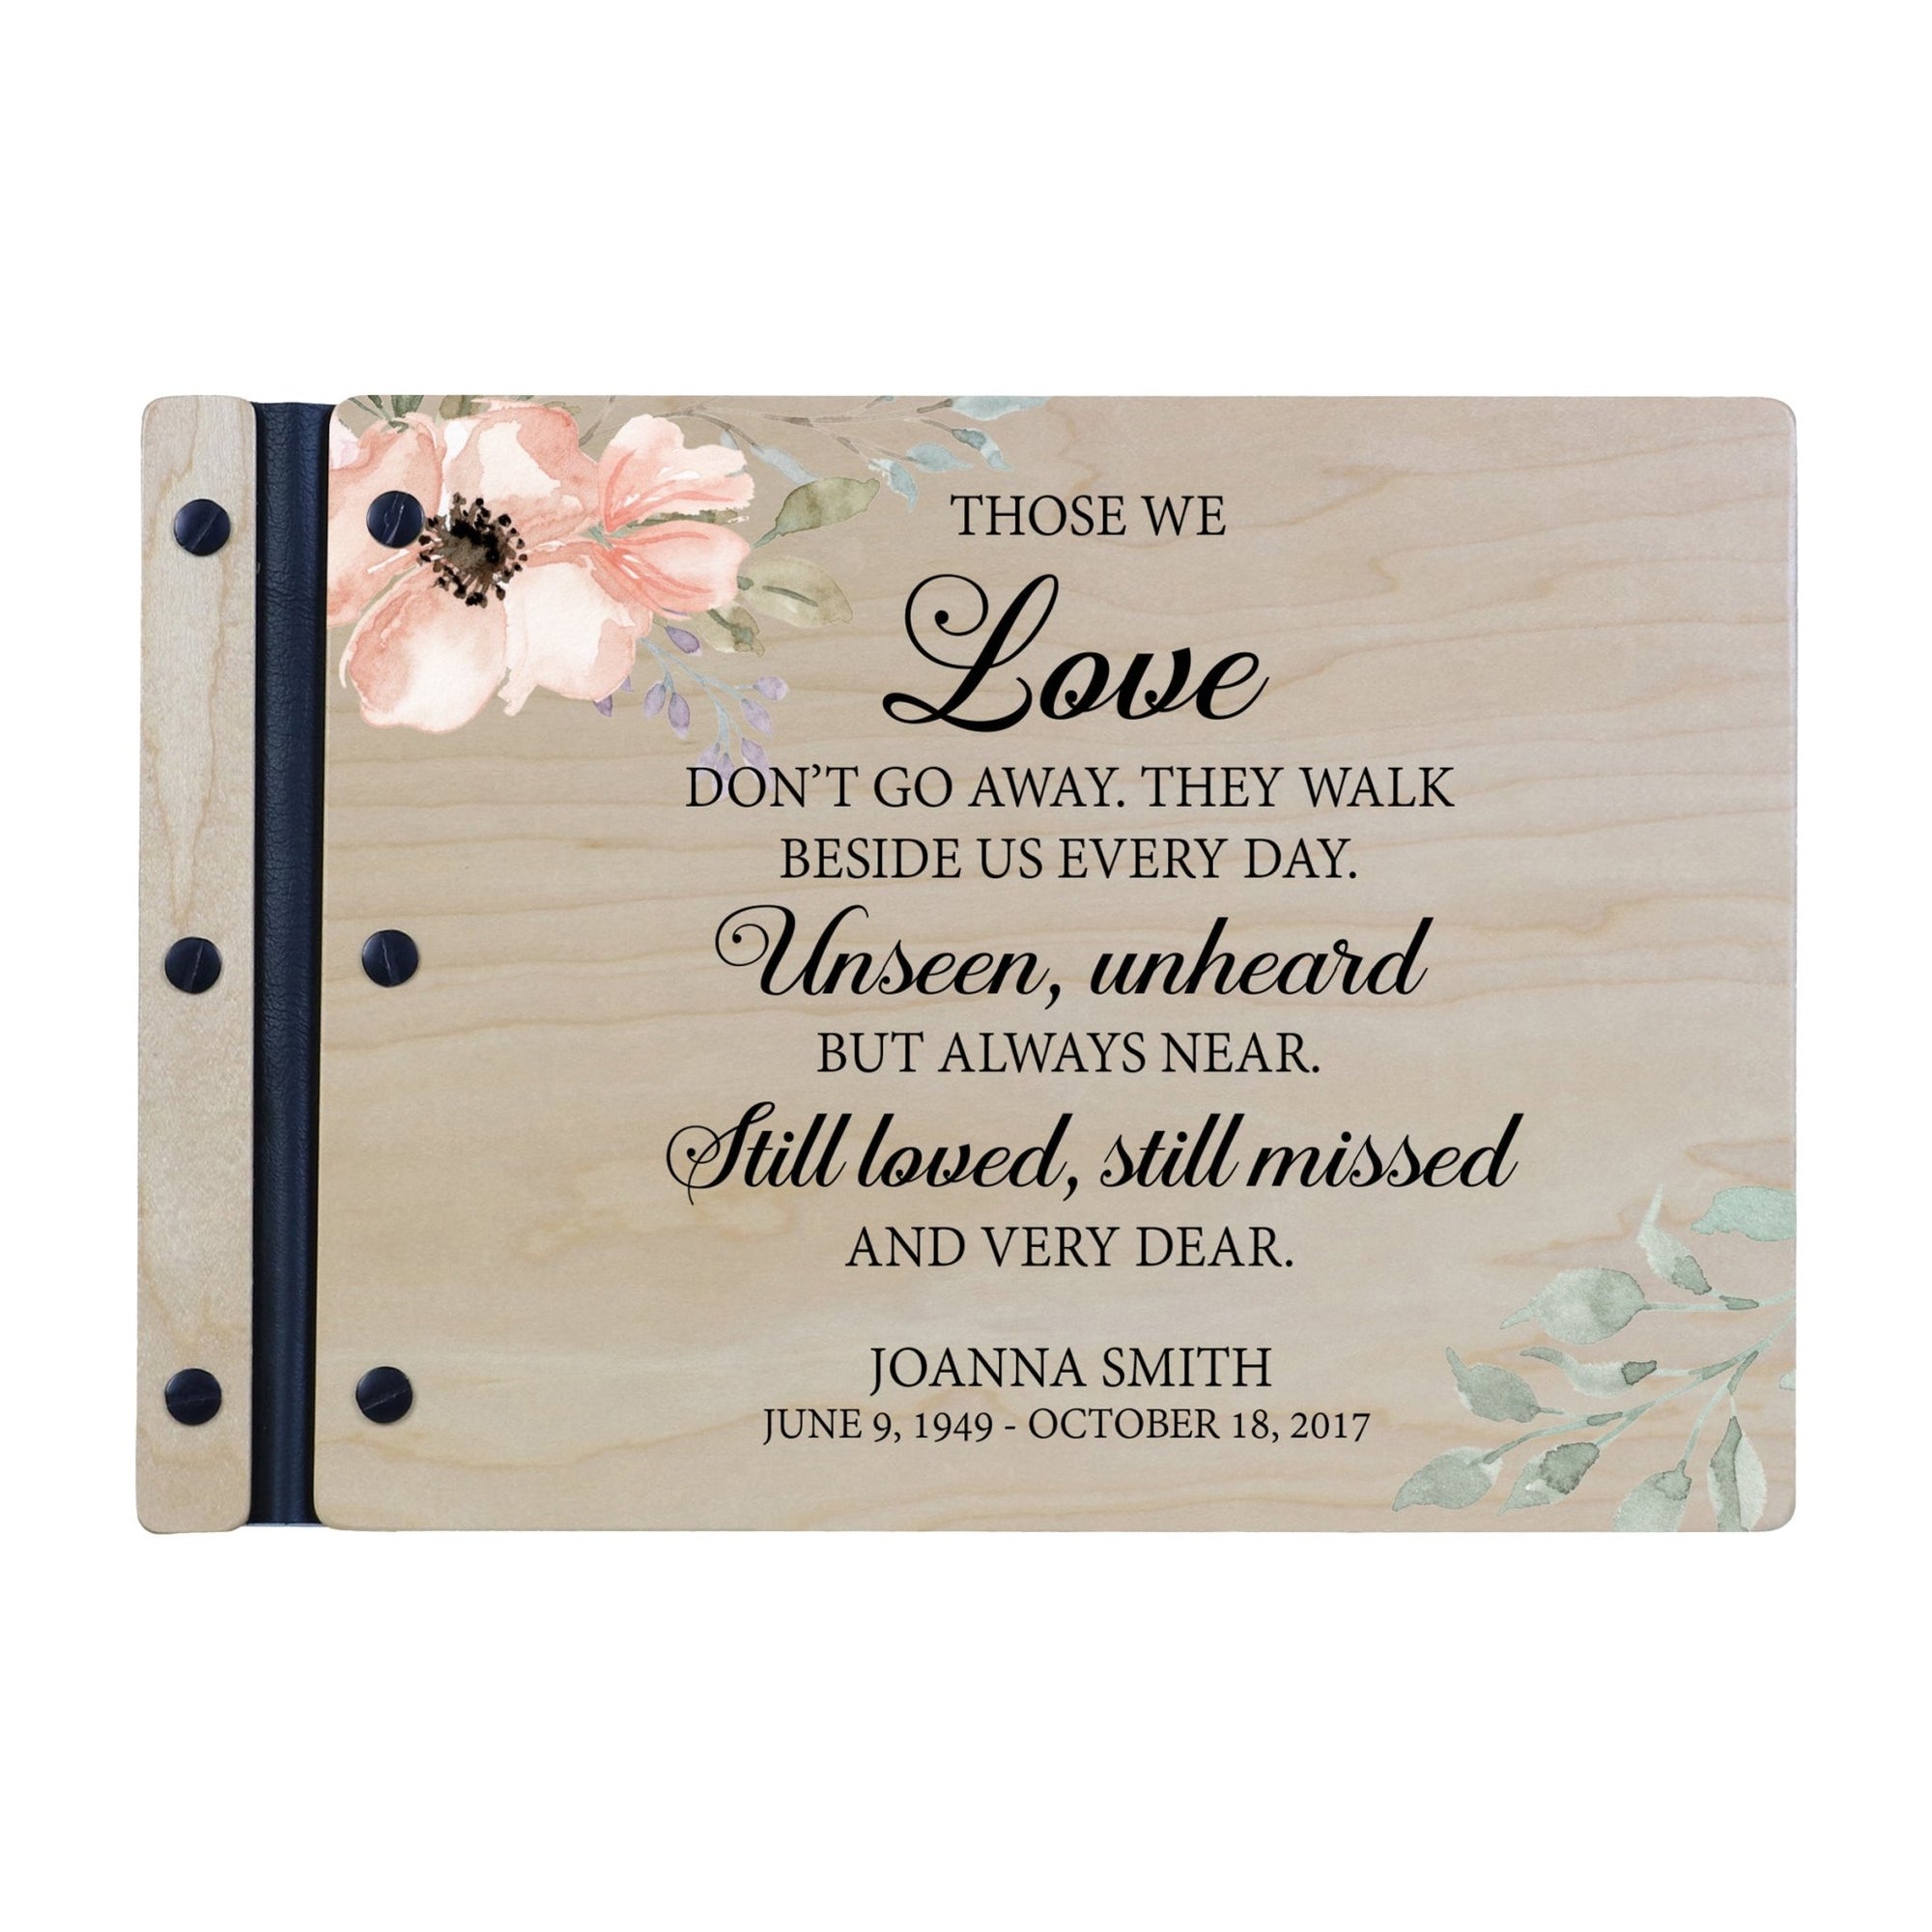 Personalized Medium Wooden Memorial Guestbook 12.375x8.5 - Those We Love (Ivory) - LifeSong Milestones